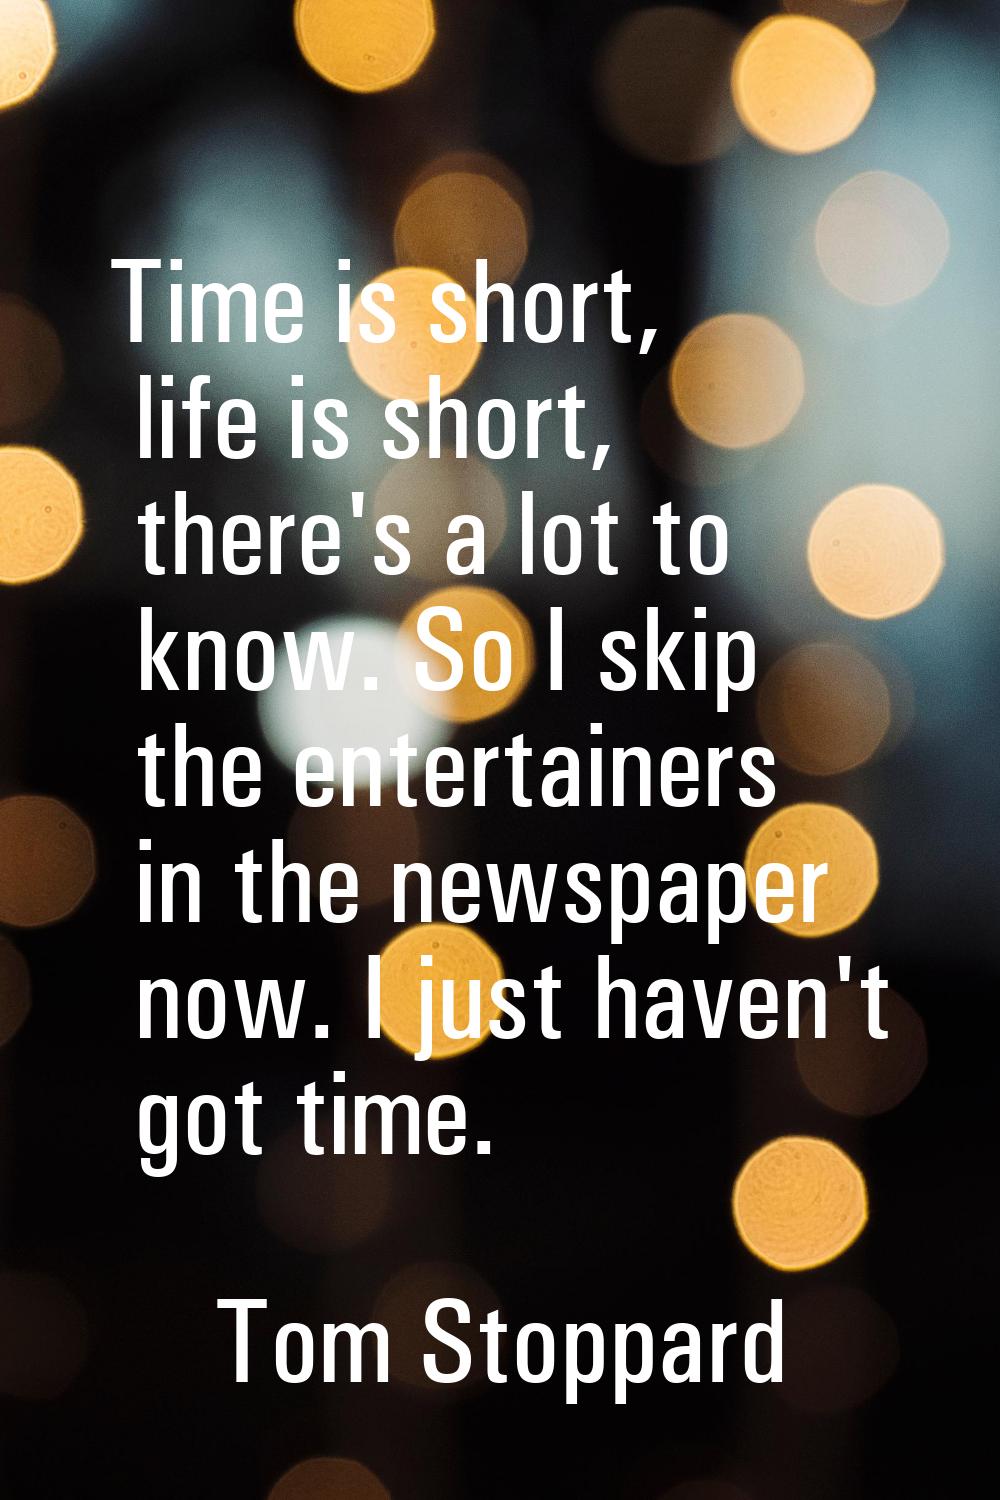 Time is short, life is short, there's a lot to know. So I skip the entertainers in the newspaper no